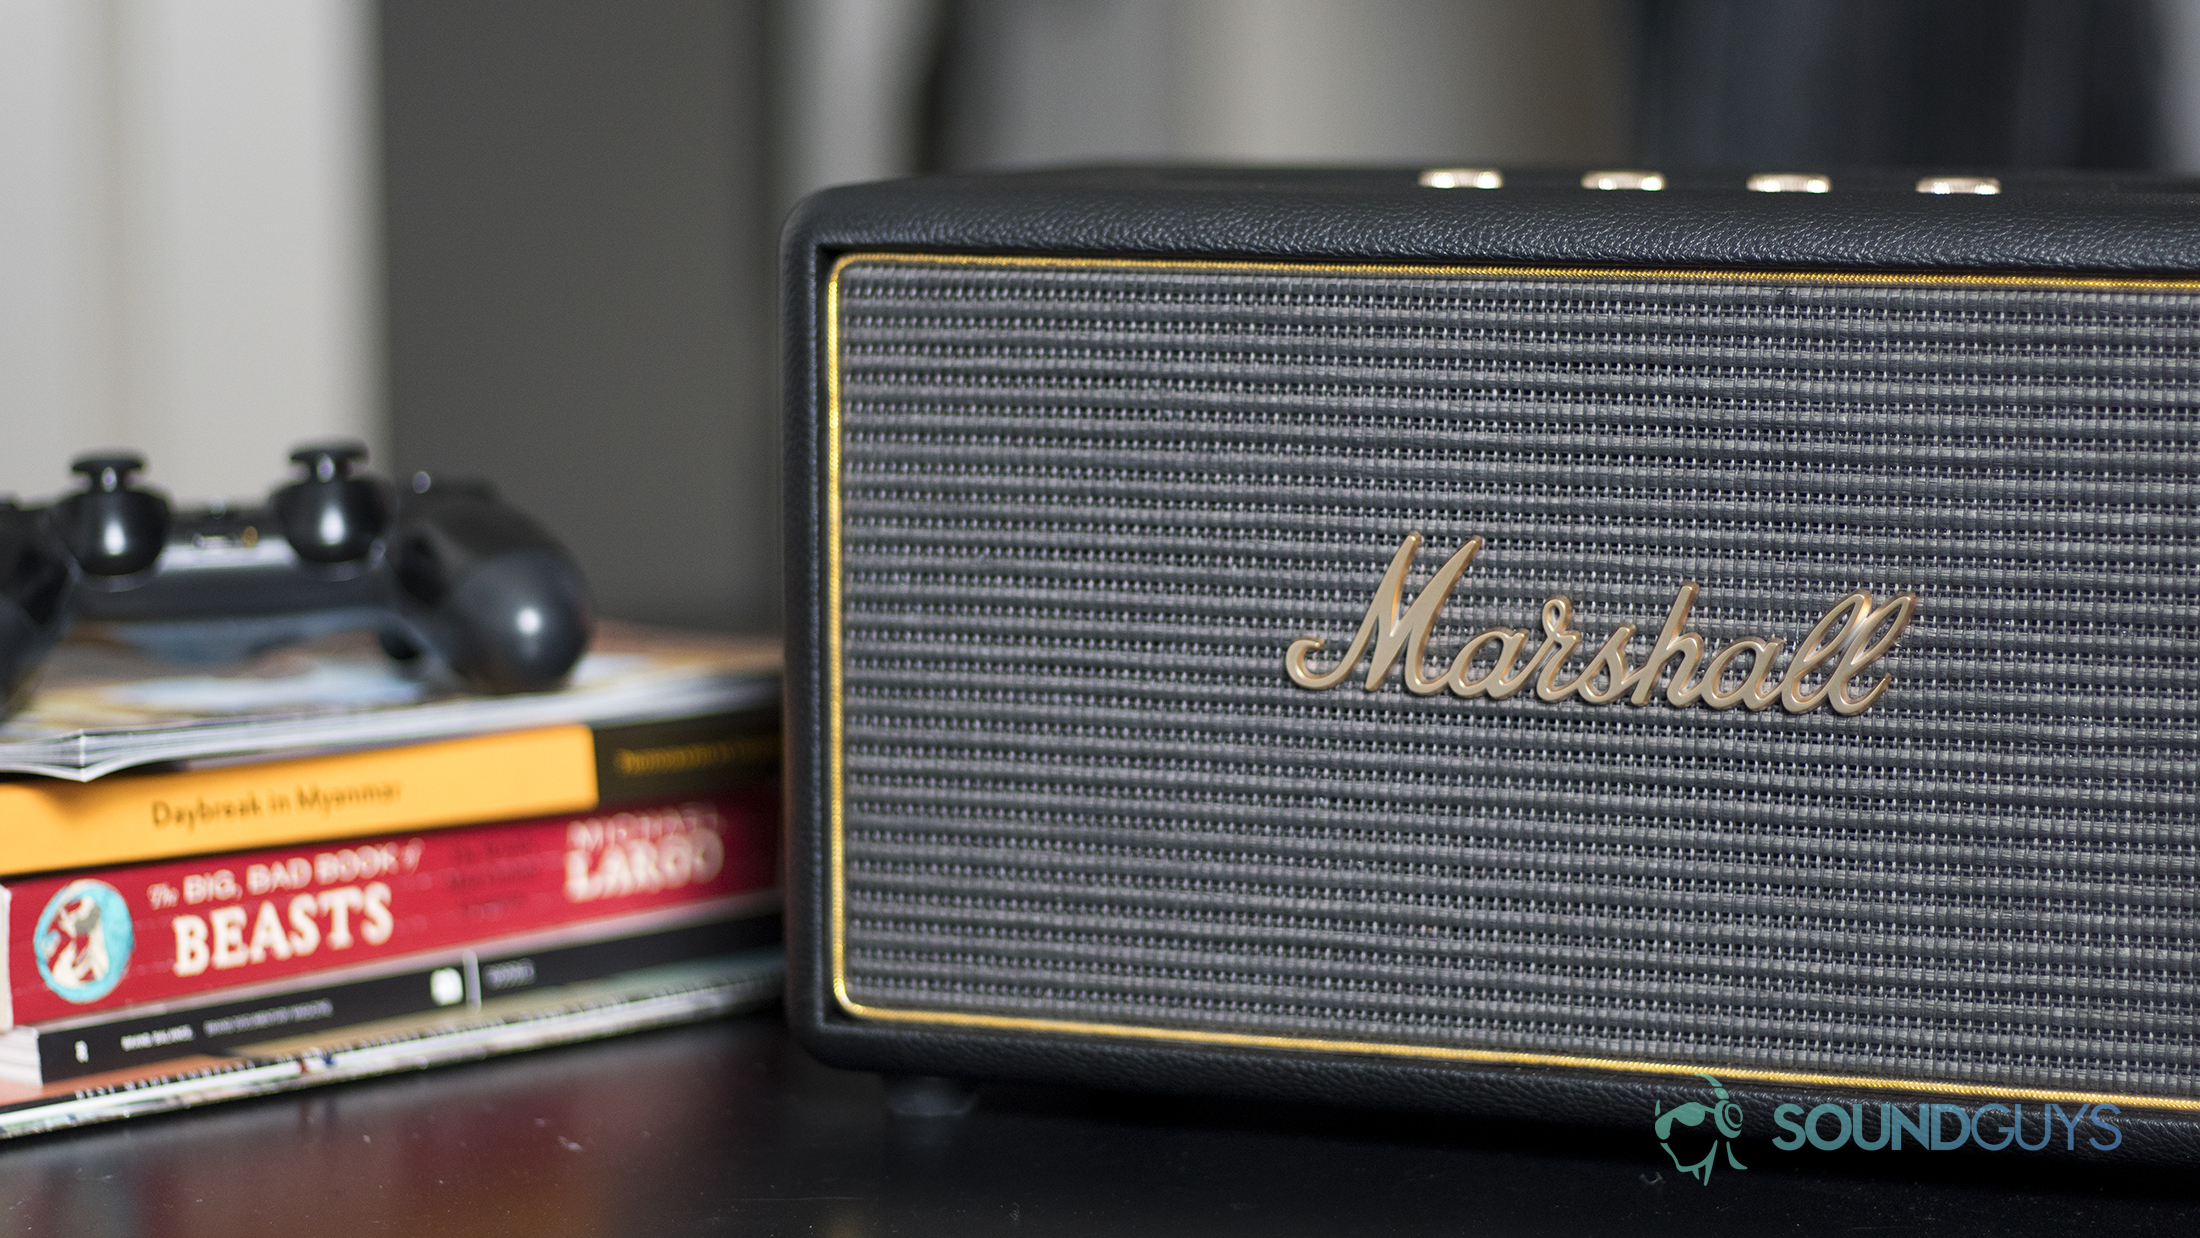 How to - Stanmore III - Get started – Marshall